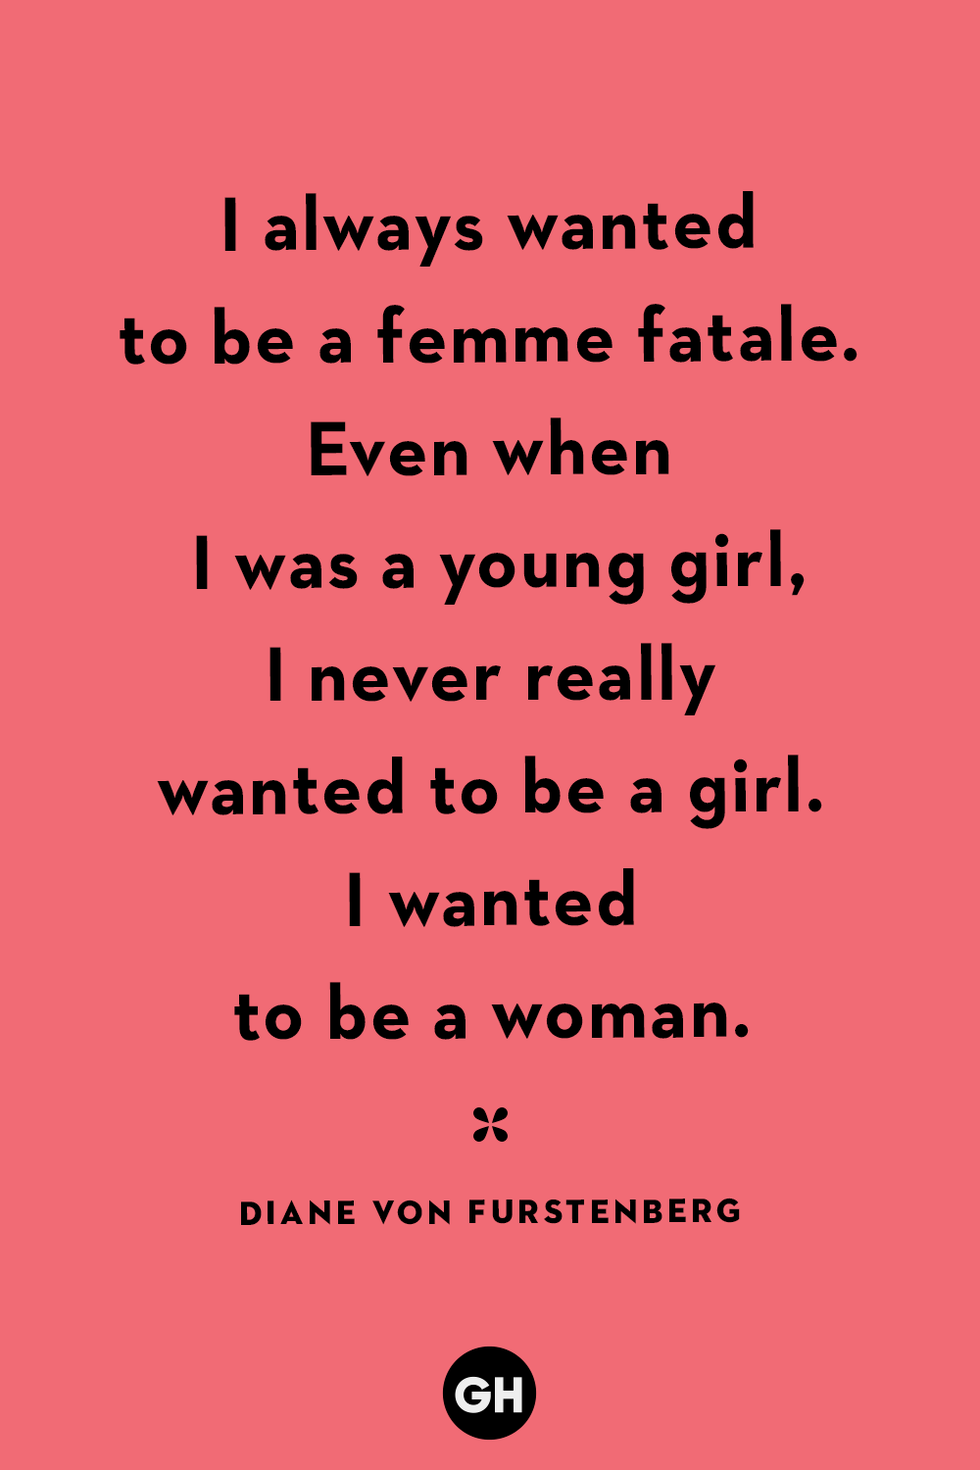 50 Powerful Strong Women Quotes - Sayings From Strong Women